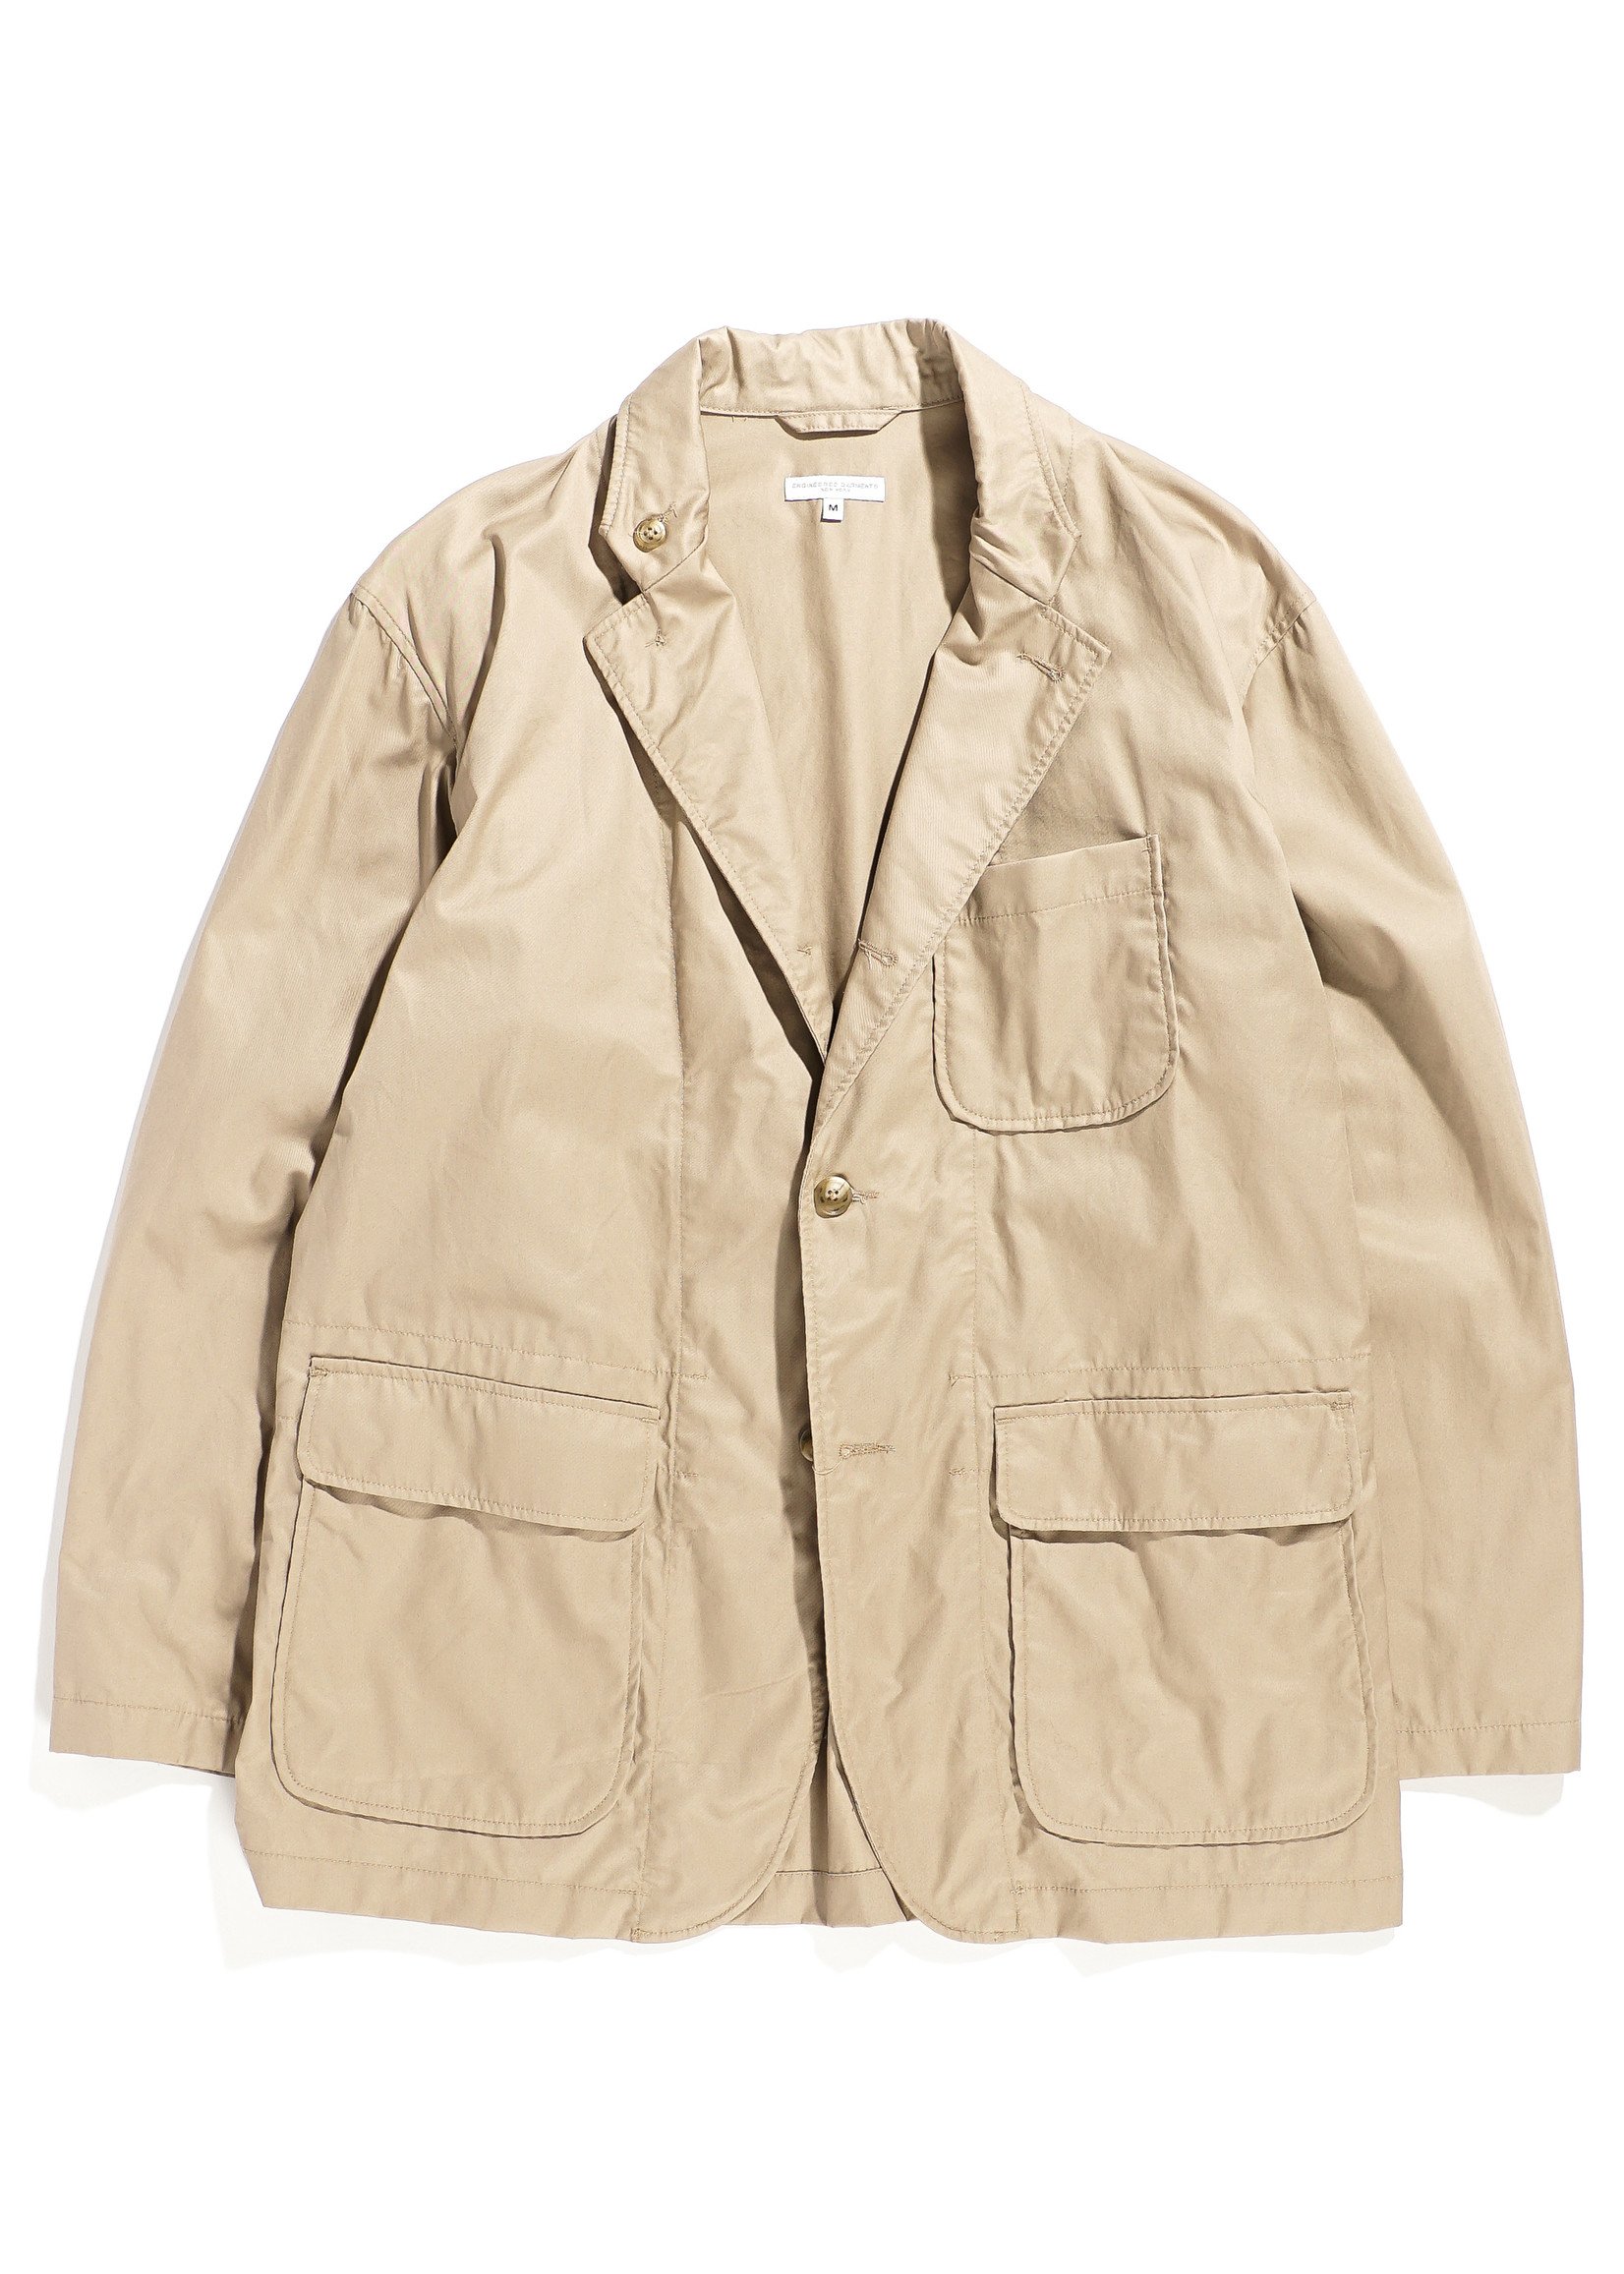 ENGINEERED GARMENTS LOITER JACKET IN HIGH COUNT TWILL